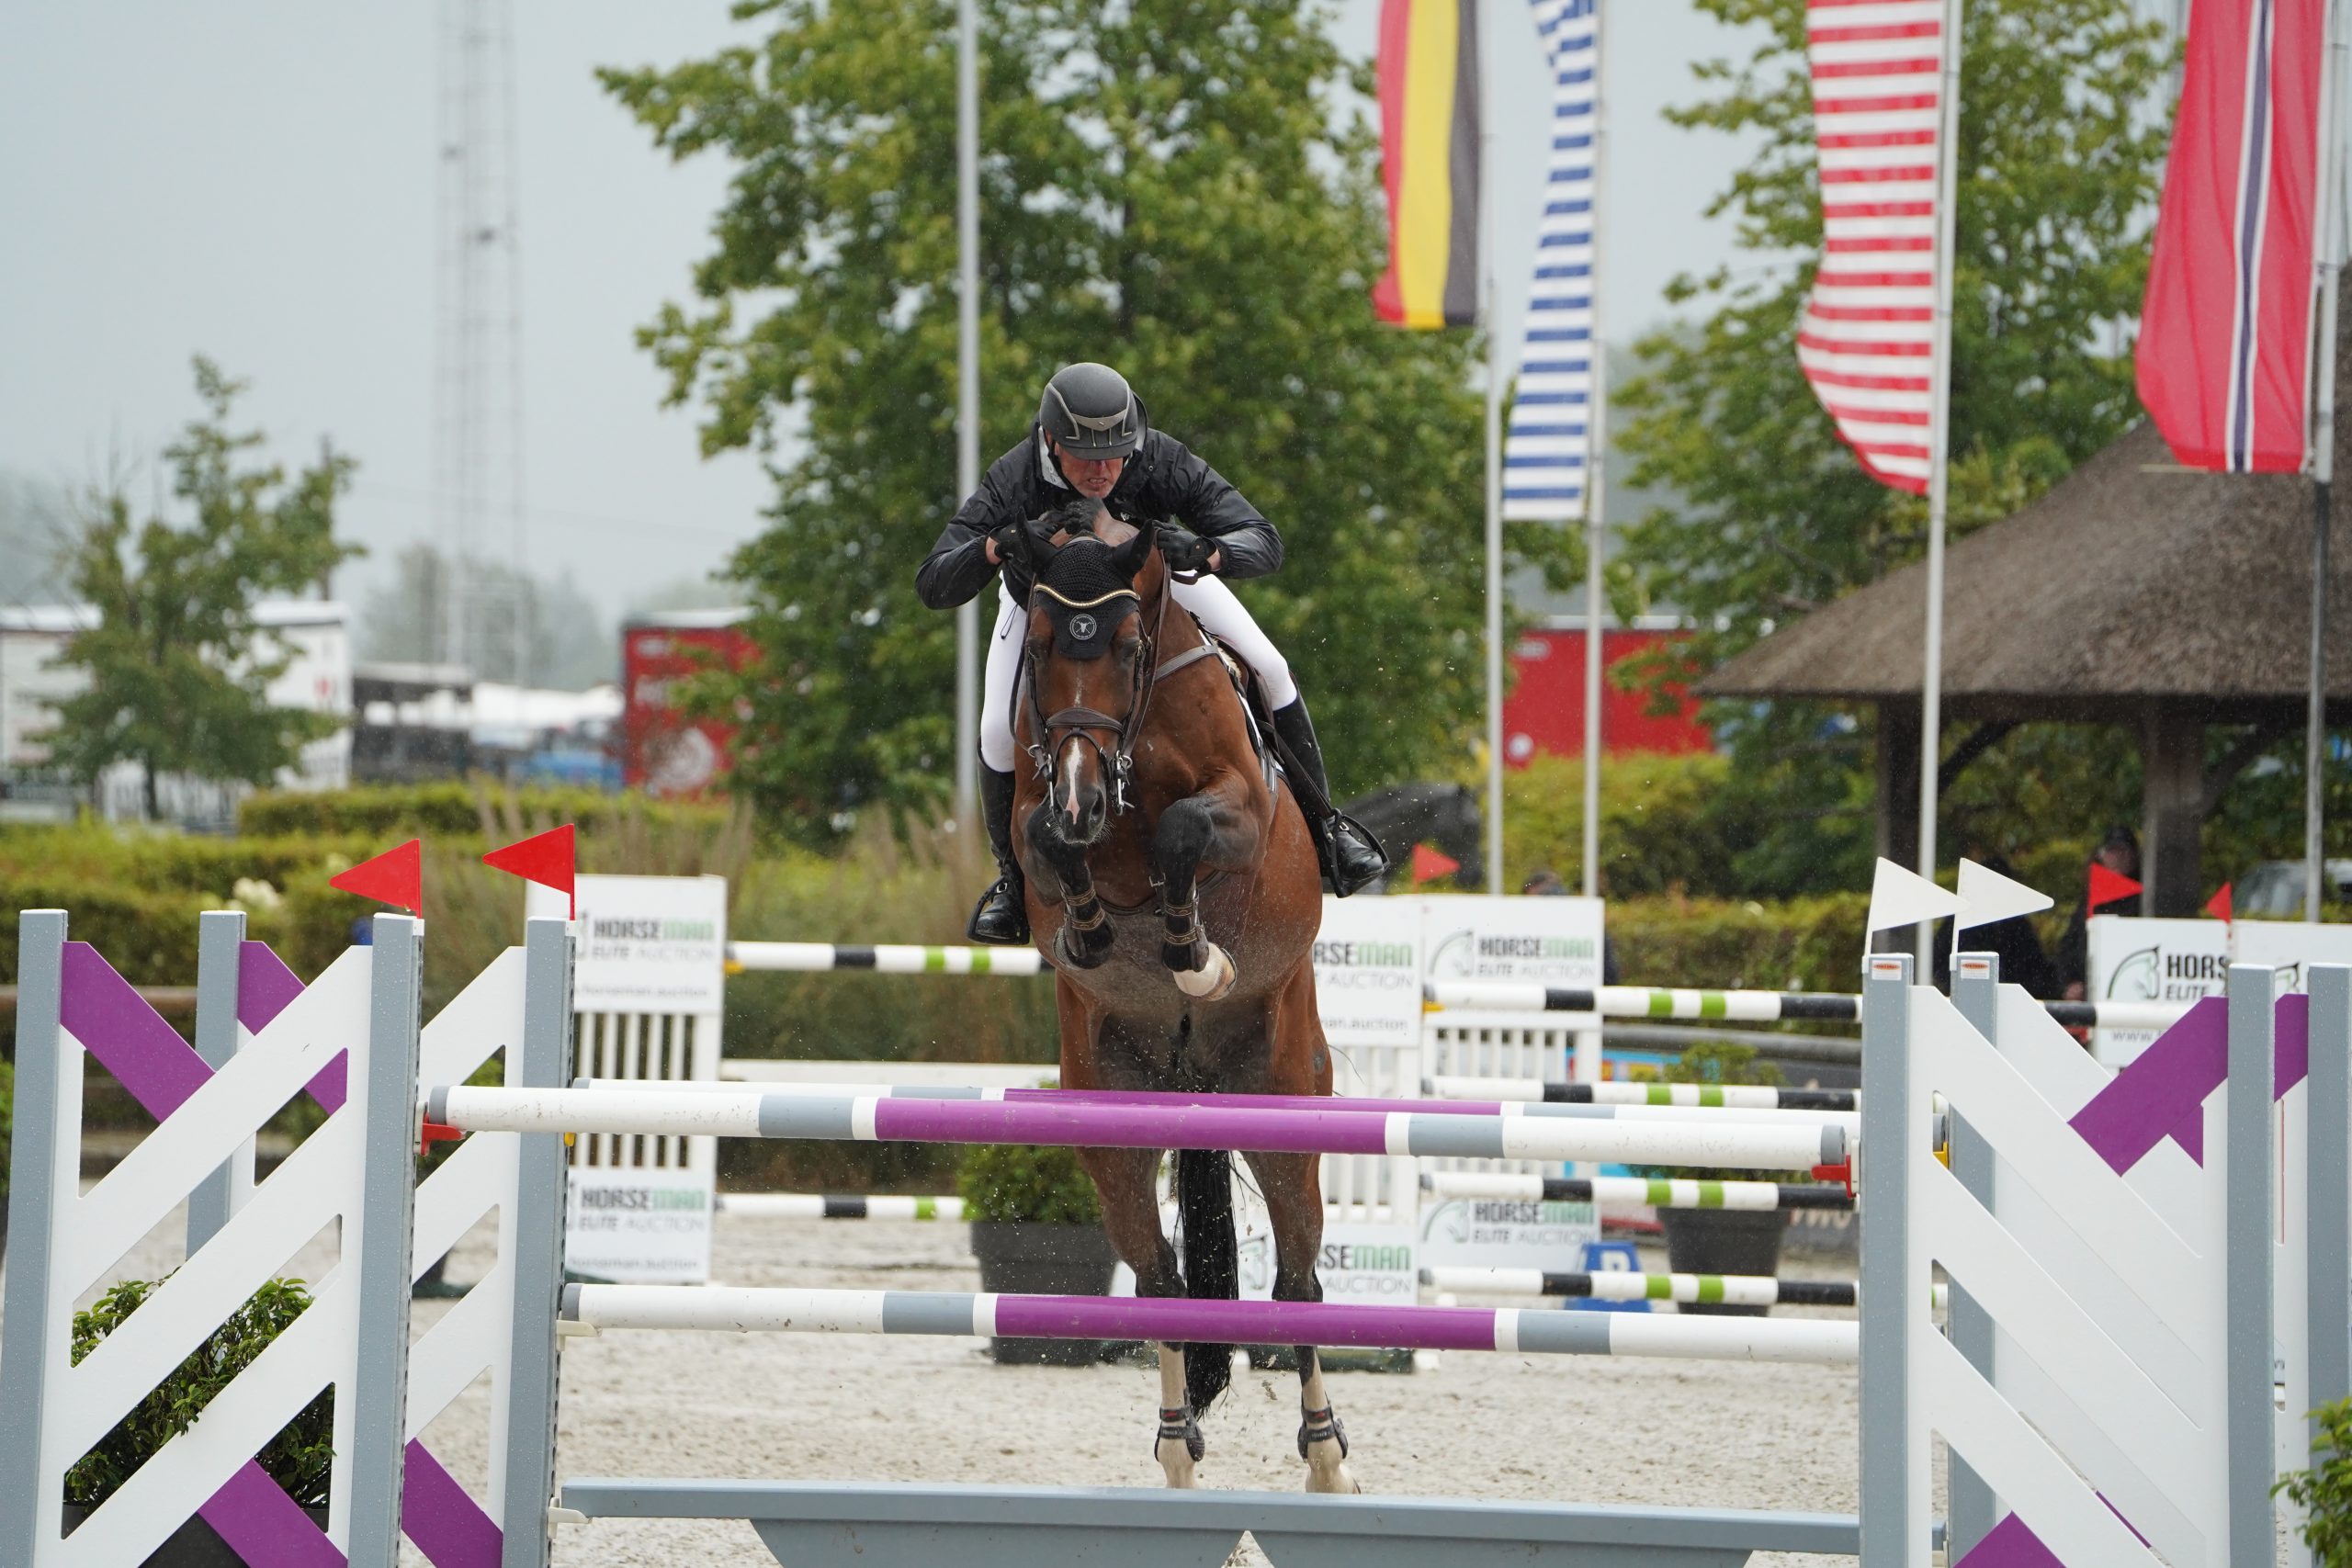 Conte du Rouet & Tal Milstein with a top 12th finish in yesterday’s CSI2* Grand Prix in Lier